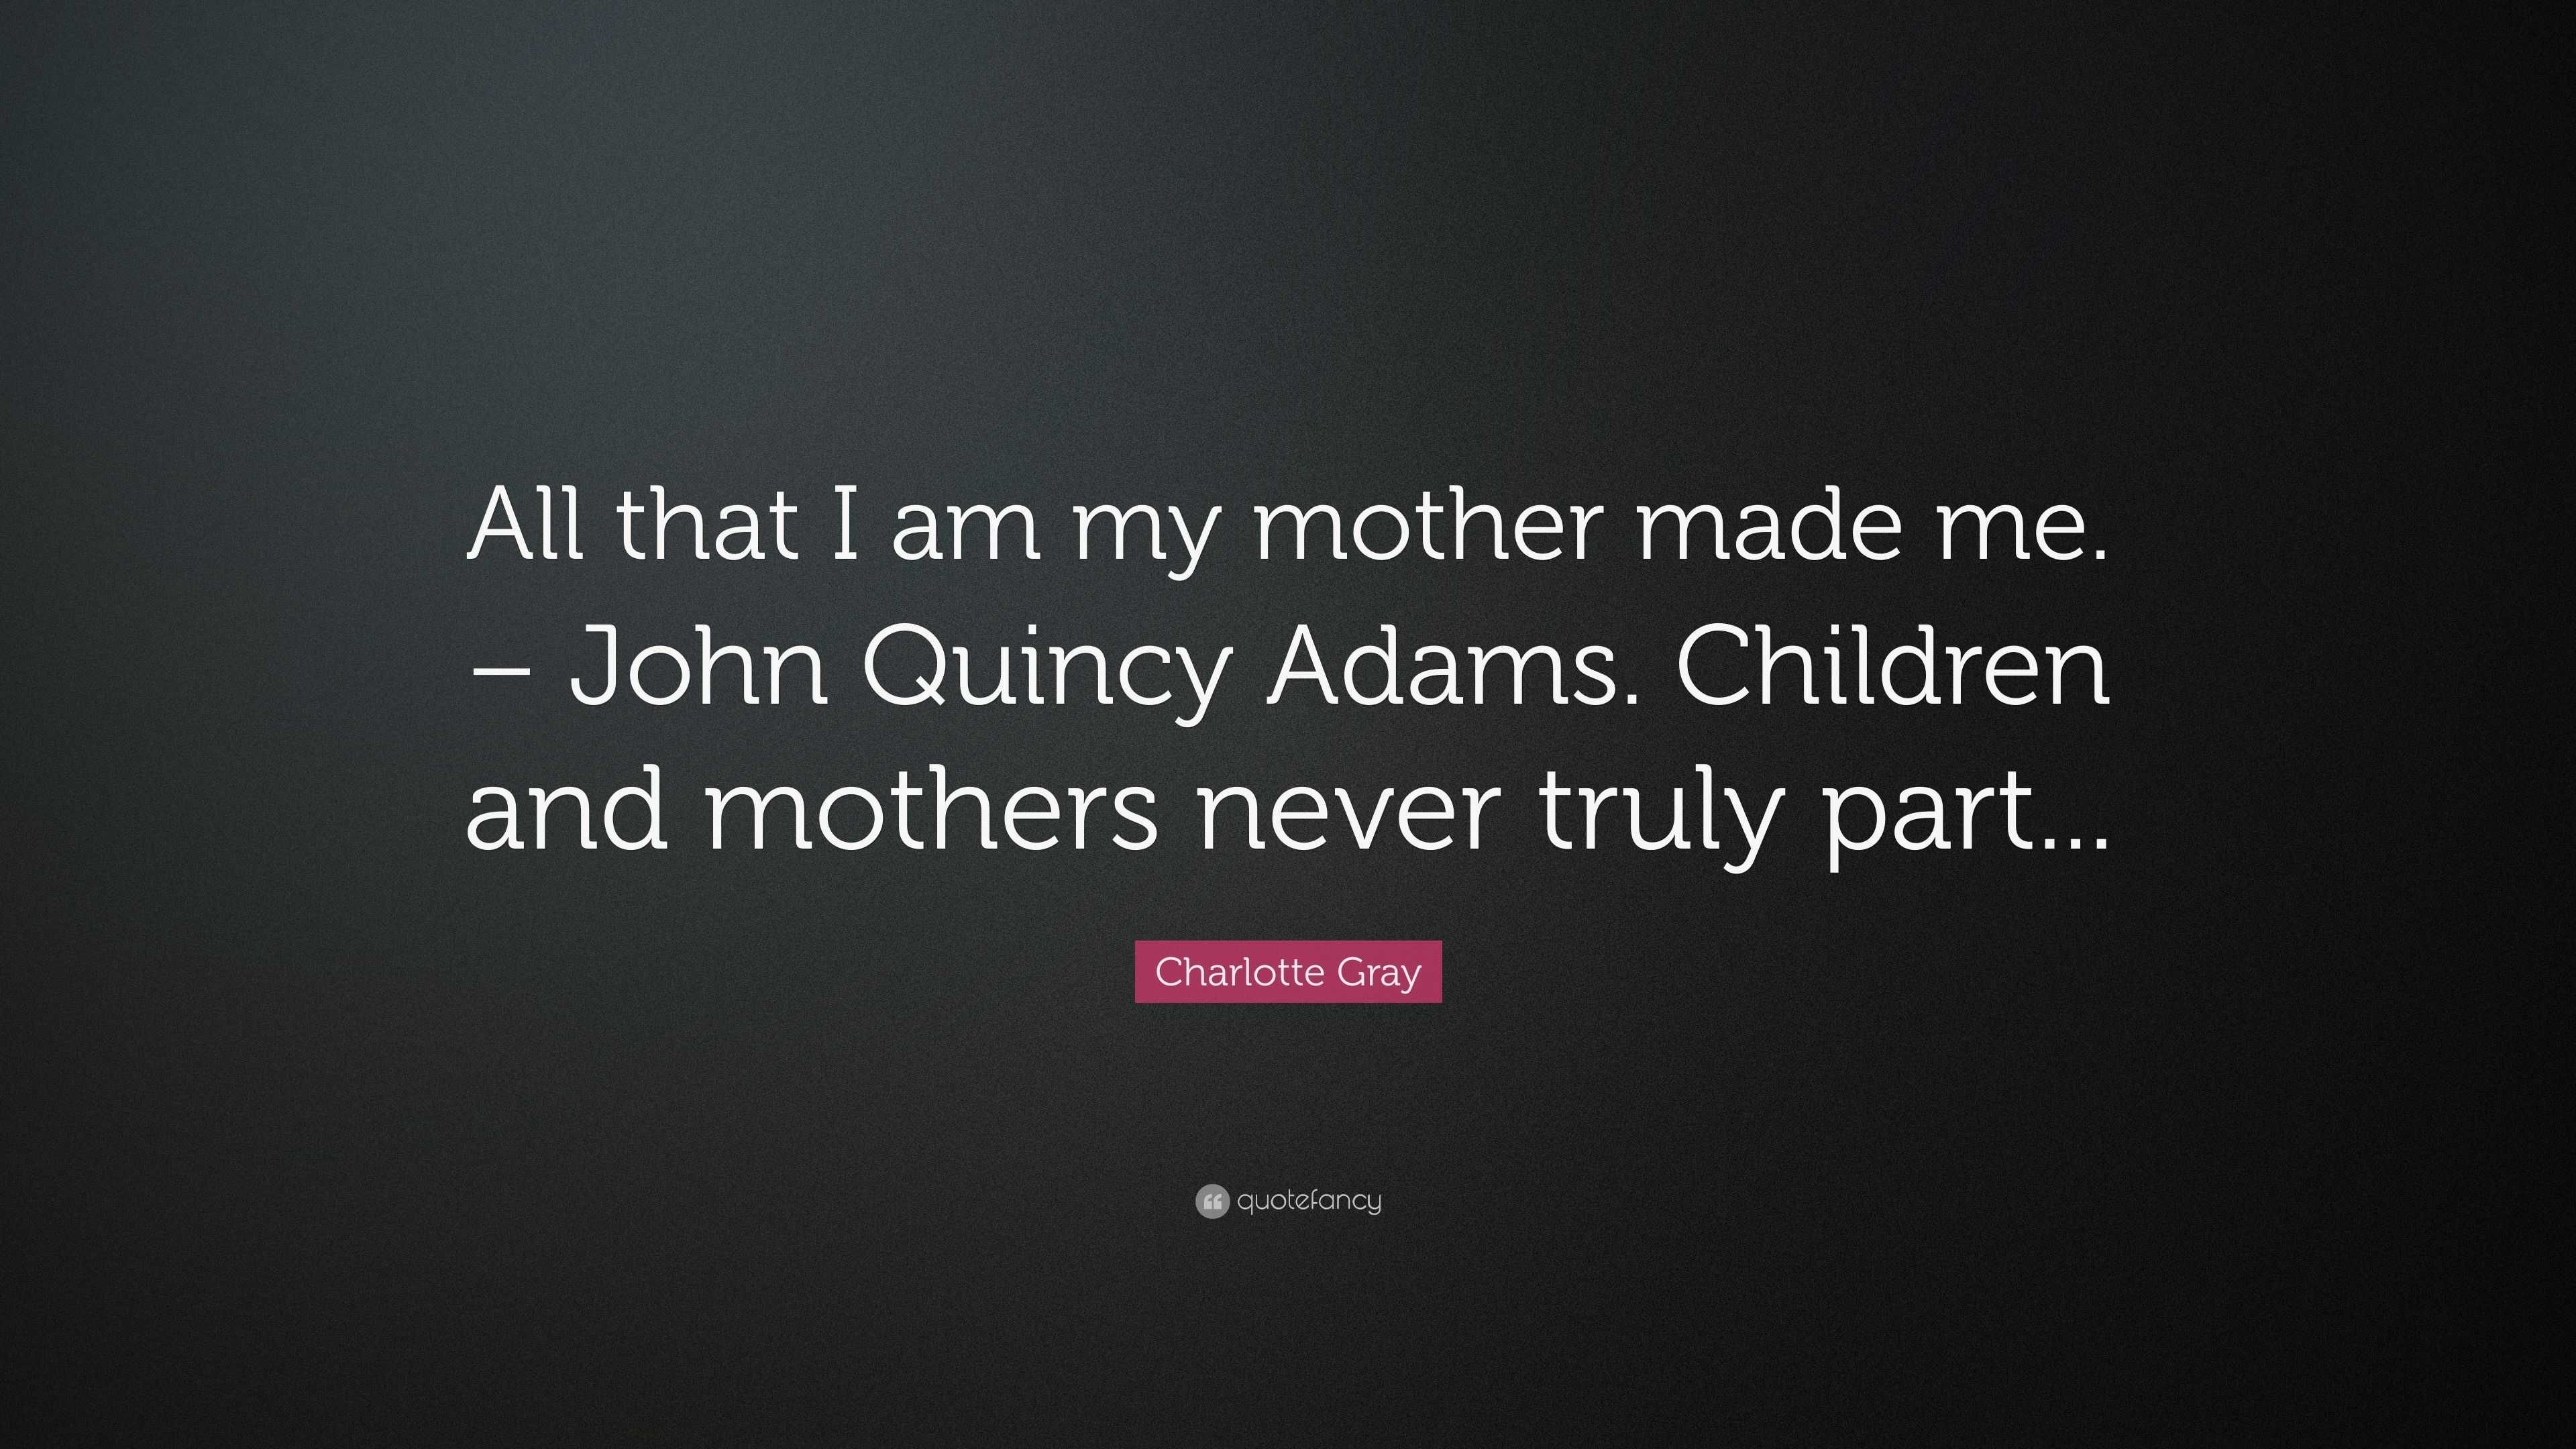 Charlotte Gray Quote: “All that I am my mother made me. – John Quincy ...